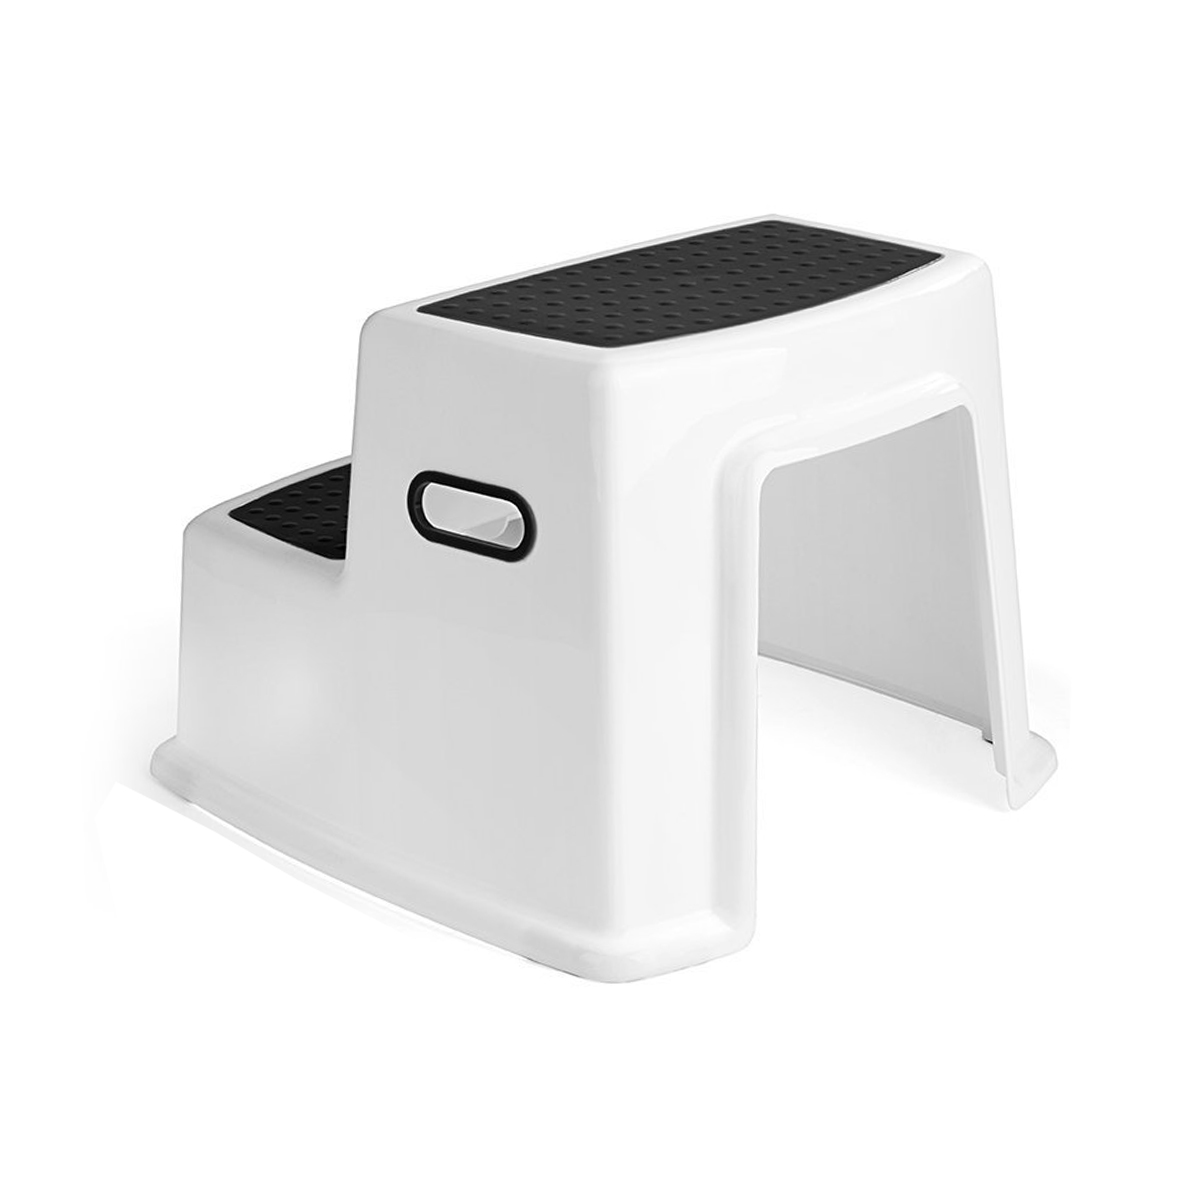 Step Stool for Kids